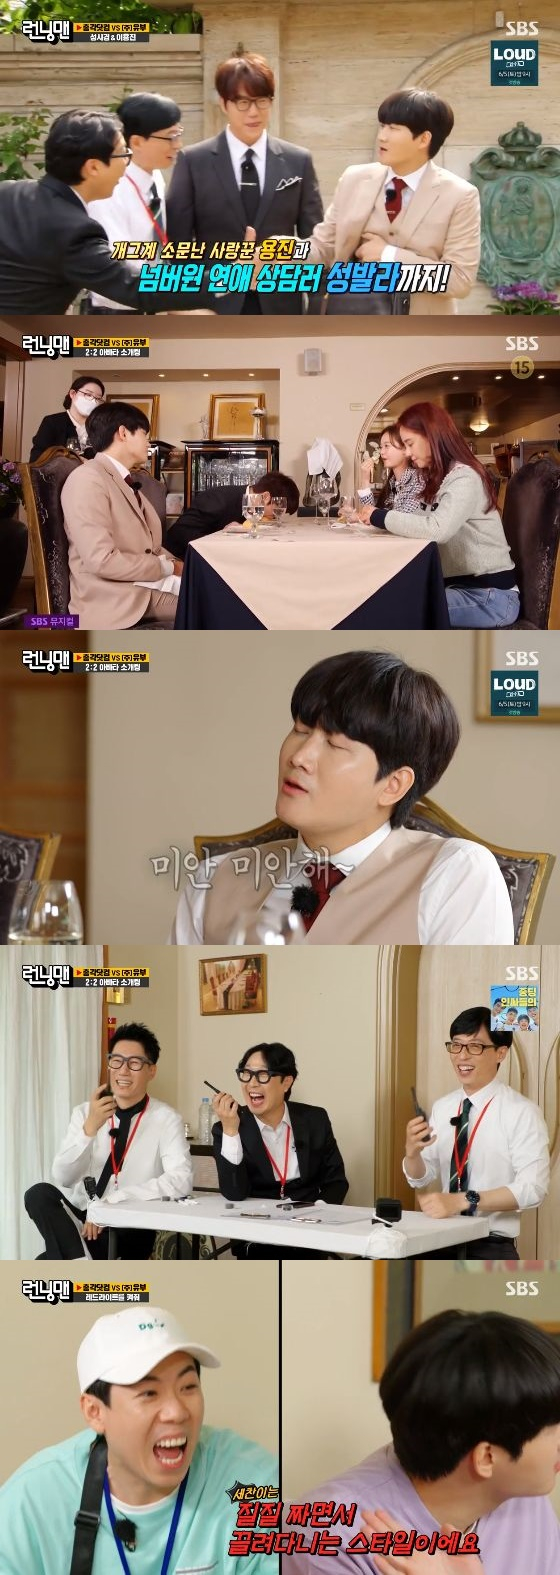 In the SBS entertainment program Running Man broadcasted on the afternoon of the 23rd, Song Ji-hyo, Jeon So-min, Lee Yong-jin, and Sung Si-kyungs Avatar blind date were drawn.On this day, two representatives of the marriage information company, Sung Si-kyung and Lee Yong-jin, appeared as guest team leaders.The mission of each team was to find the ideal type of VIP Song Ji-hyo and Jeon So-min, and the satisfaction evaluation was conducted for each mission presented, and the team with the highest final score won.First, Avatar blind date was made.Sung Si-kyung and Lee Yong-jin, who are representatives of each company and do not have many contacts with Song Ji-hyo and Jeon So-min, came out.The two mens actions were directed by male members in the situation room and had to be carried out as they were.The atmosphere is so uncomfortable, I want to go home once I sit down, Song Ji-hyo said, revealing that blind date was his first.On the other hand, Jeon So-min smiled at the appearance of Sung Si-kyung, saying, It is a voice that is not available to my brothers.The brothers of the situation room laughed with the pro-brother moment, saying, I do not want to see Jeon So-min pretending to be cute.Sung Si-kyung and Lee Yong-jin faithfully carried out the instructions of the members in the situation room.Sung Si-kyung laughed naturally by performing eating bread without touching and drinking water and gaggling.So Song Ji-hyo and Jeon So-min laughed and liked it, and they showed food sucking into the bowl along Sung Si-kyung.Lee Yong-jin also showed a reversal situational drama that performed rocking dance to Kim Kyung Ho song.As the blind date atmosphere ripened, female members were asked about the marriage view, with Jeon So-min saying: Marriage seems real.Song Ji-hyo added: When I get older, there are many people who think that: some people are married around...Song Ji-hyo replied: I dont want marriage to be the purpose; I hope a good man knows sorry.Then, Turn the Redlight was conducted on the next mission.This is a parody of Witch Hunting, which Sung Si-kyung had seen in the old MC, and the love consultation contents of Running Man members were unfolded.Sung Si-kyung showed an emotional empathy for the audiences story as a love counseling expert. Other members also showed a smoky love counseling based on their love story.Yoo Jae-Suk laughed with extreme examples, saying, You have to pour your nosebleeds on a date and fall down. You have to come out with a ringer.Among them, Lee Yong-jin and Yang Se-chan revealed that they know all the love affairs of each other.Lee Yong-jin provoked Yang Se-chan is a style of being dragged around in a weaving manner.Yang Se-chan responded, I want to talk to you too, but Im holding up because of my sister-in-law.Lee Yong-jin and Sung Si-kyung appeared in a neat suit that fits the marriage information company situation drama.However, in Avatar blind date, I was able to see two people who faithfully perform the mischievous instructions of the members.Song Ji-hyo, Jeon So-min, who worked on blind date, as well as viewers, showed a great attraction.